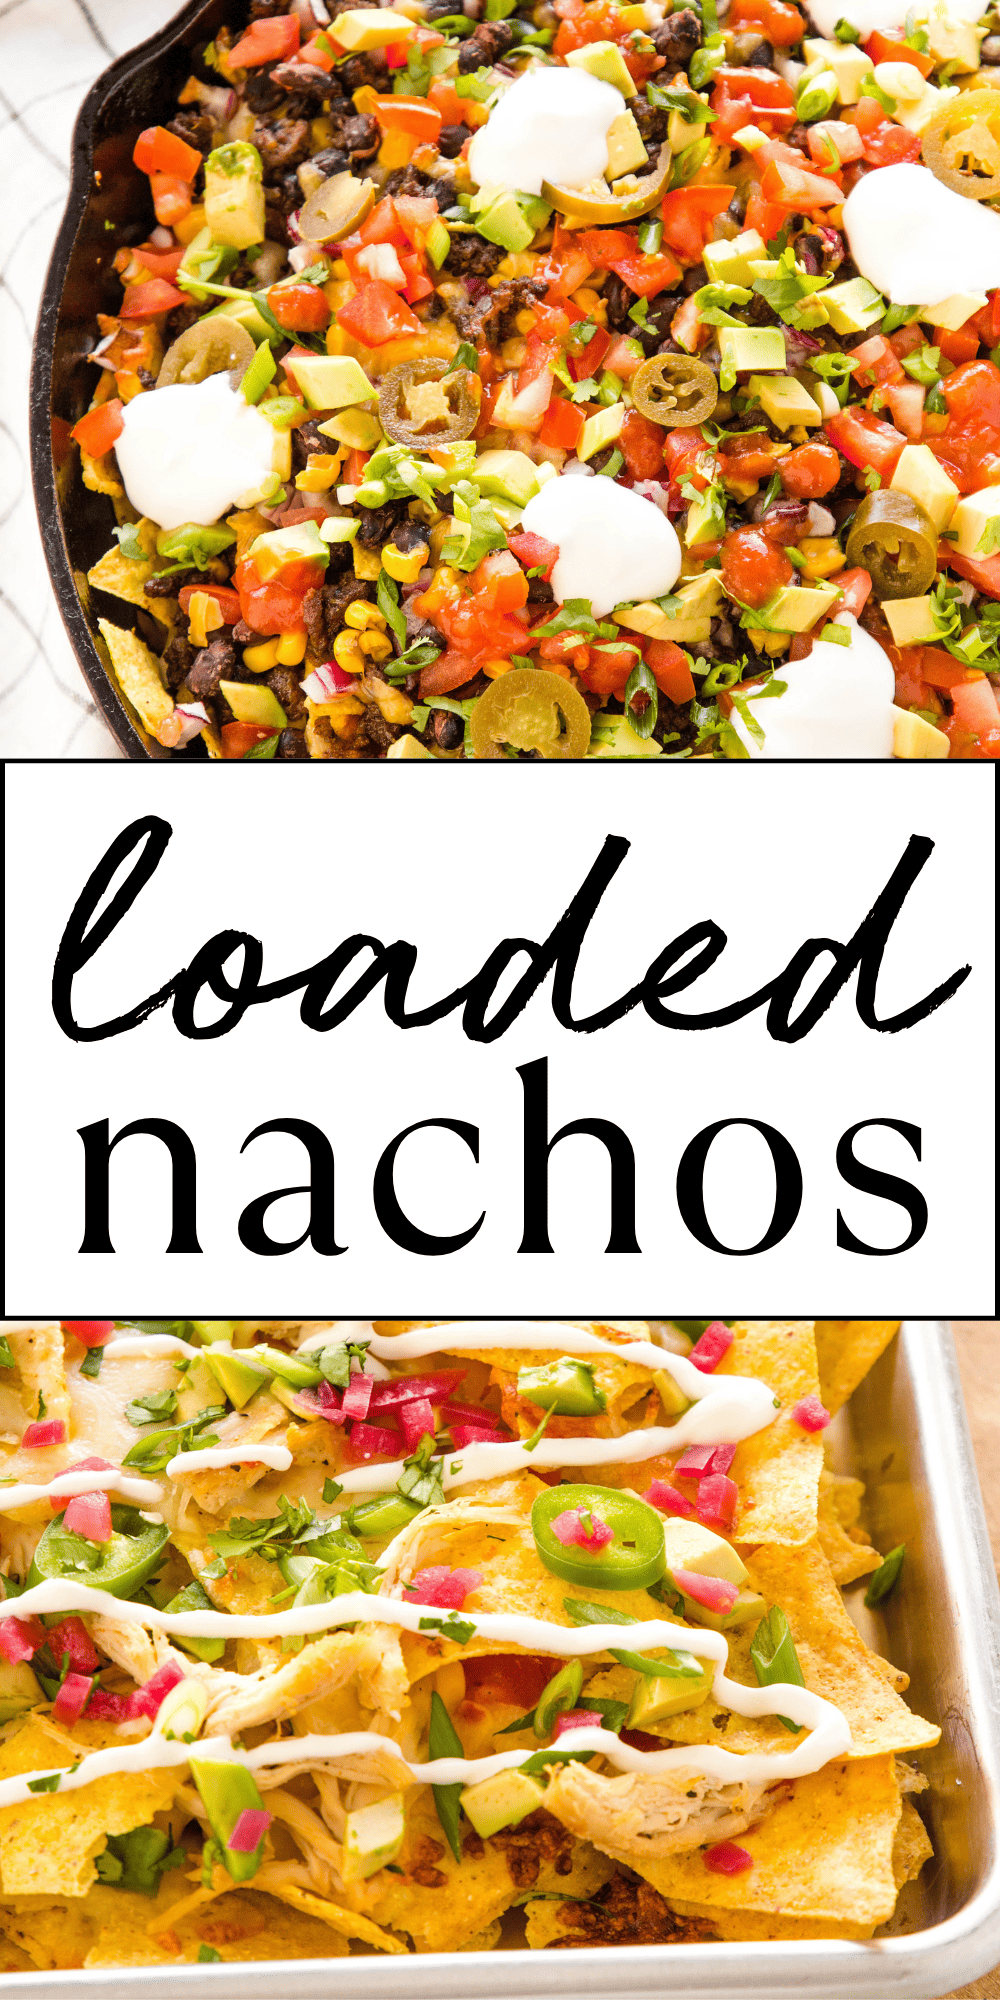 This Nachos recipe is the ultimate guide to making crispy restaurant-style nachos with your favourite toppings. Recipe from thebusybaker.ca! #easynachos #chickennachos #beefnachos #nachorecipe #vegetariannachos #veggienachos #loadednachos #appetizernachos #snacknachos via @busybakerblog